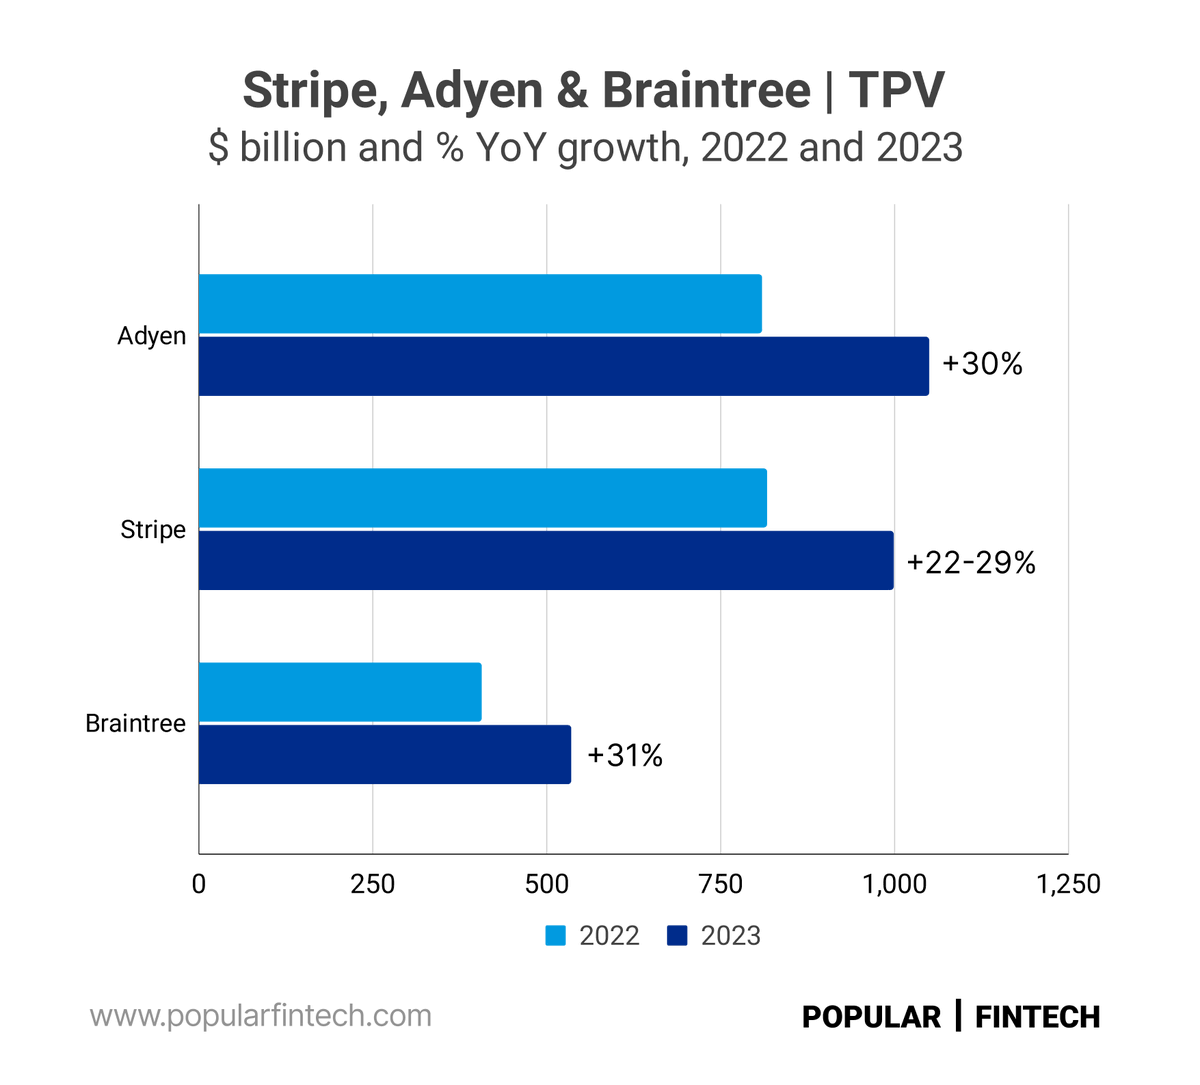 📚 Good Read: Reasons to be bullish on PayPal. My favorite new Fintech analyst @jevgenijs nails it with this one.

1. Braintree is growing as fast as Adyen or Stripe, it just has worse margins.
2. International is a huge opportunity.
3. Getting branded right is critical.

Summary…